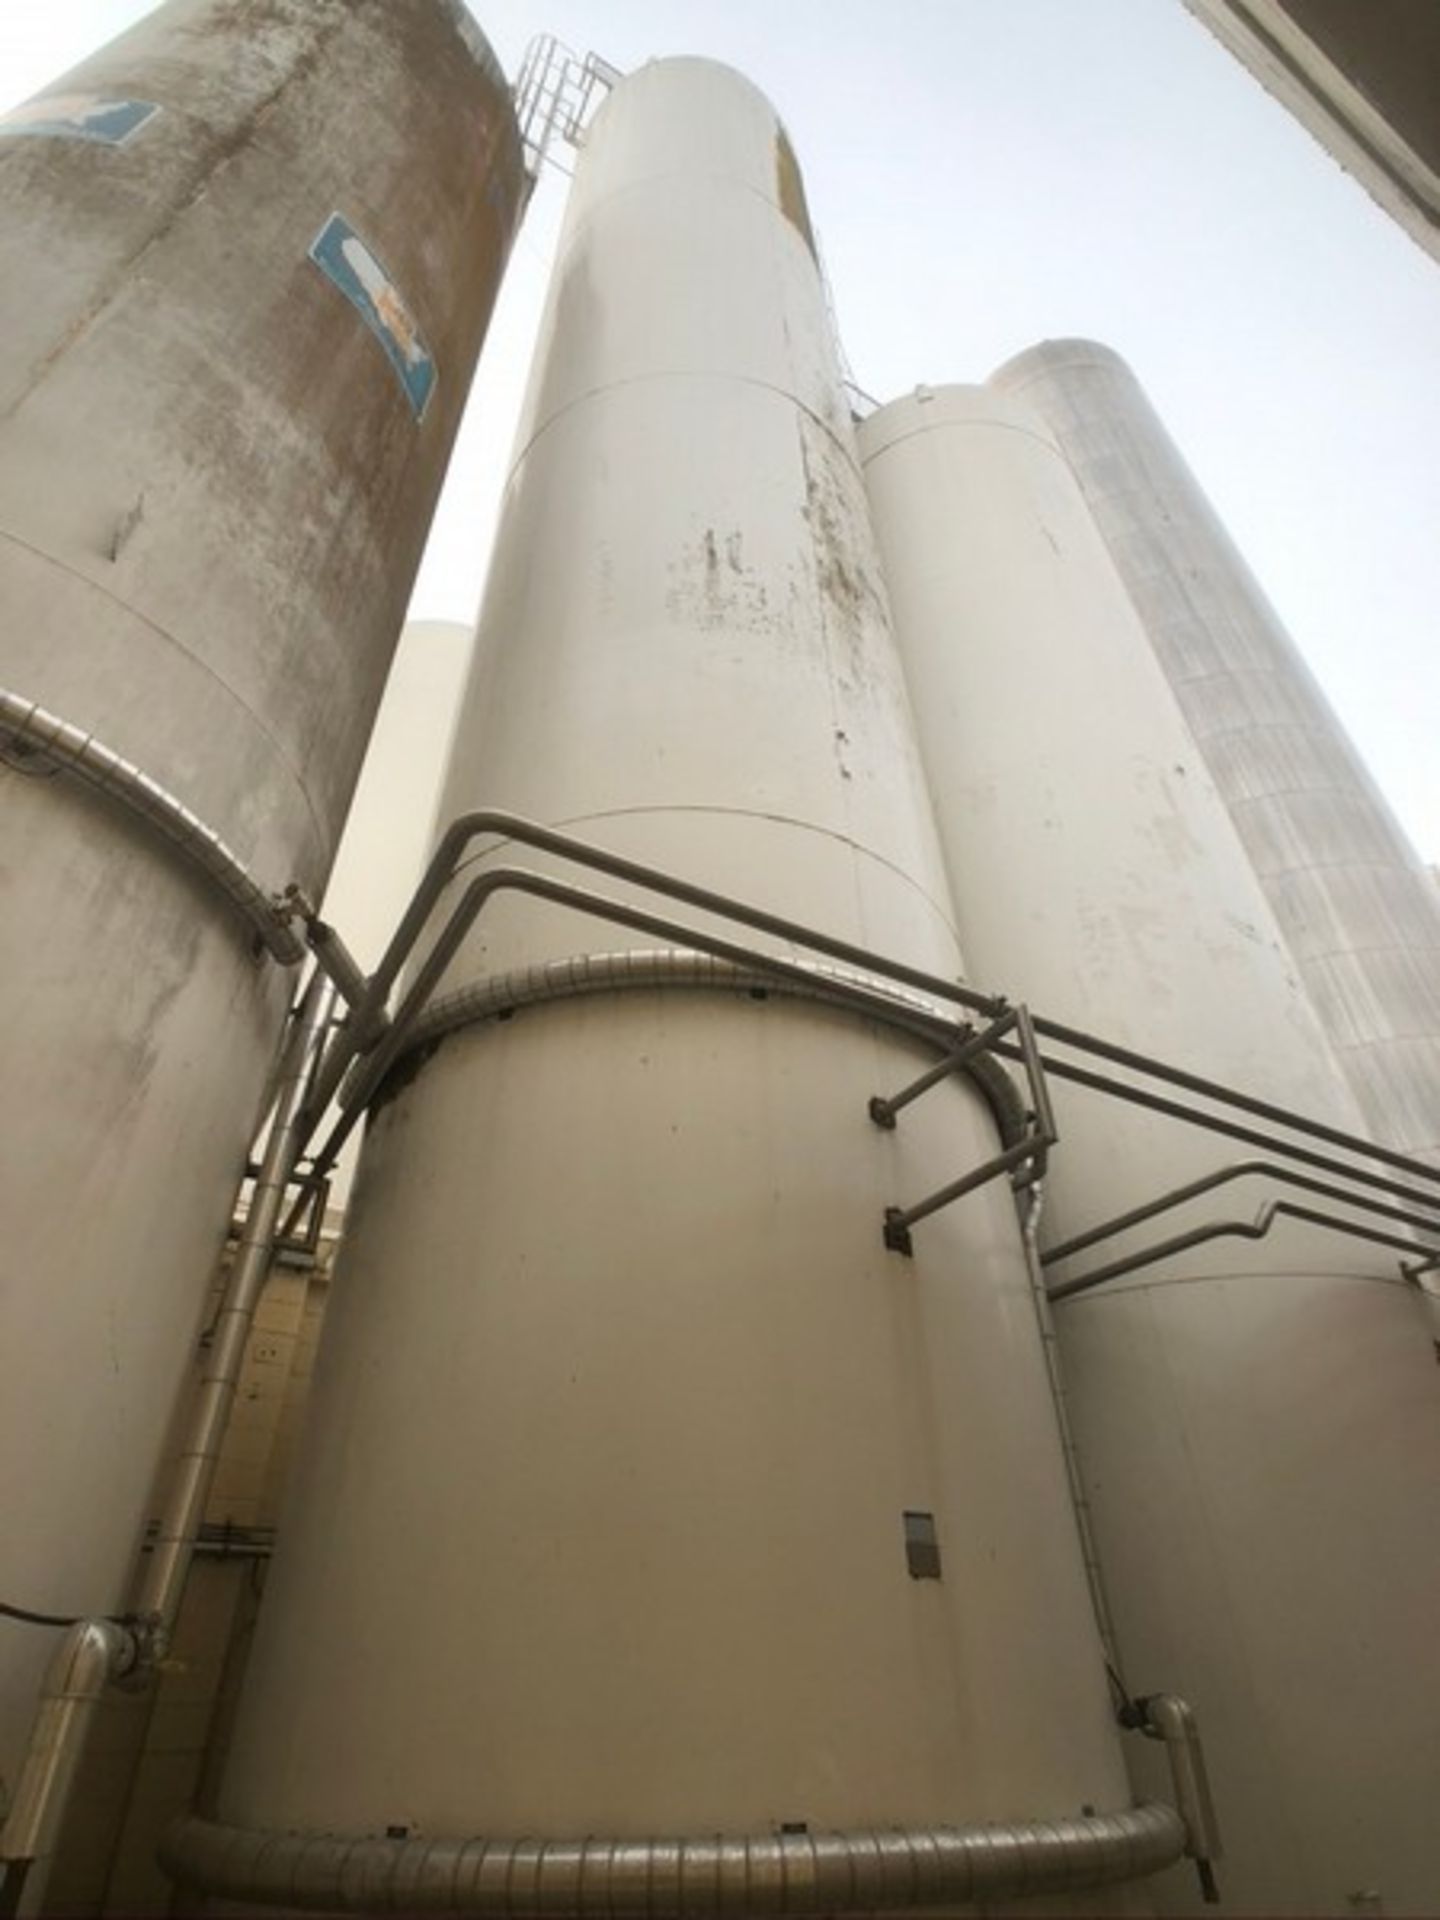 MUELLER 60,000 GALLON JACKETED SILO, S/N 110549, HORIZONTAL AGITATION - Image 3 of 30